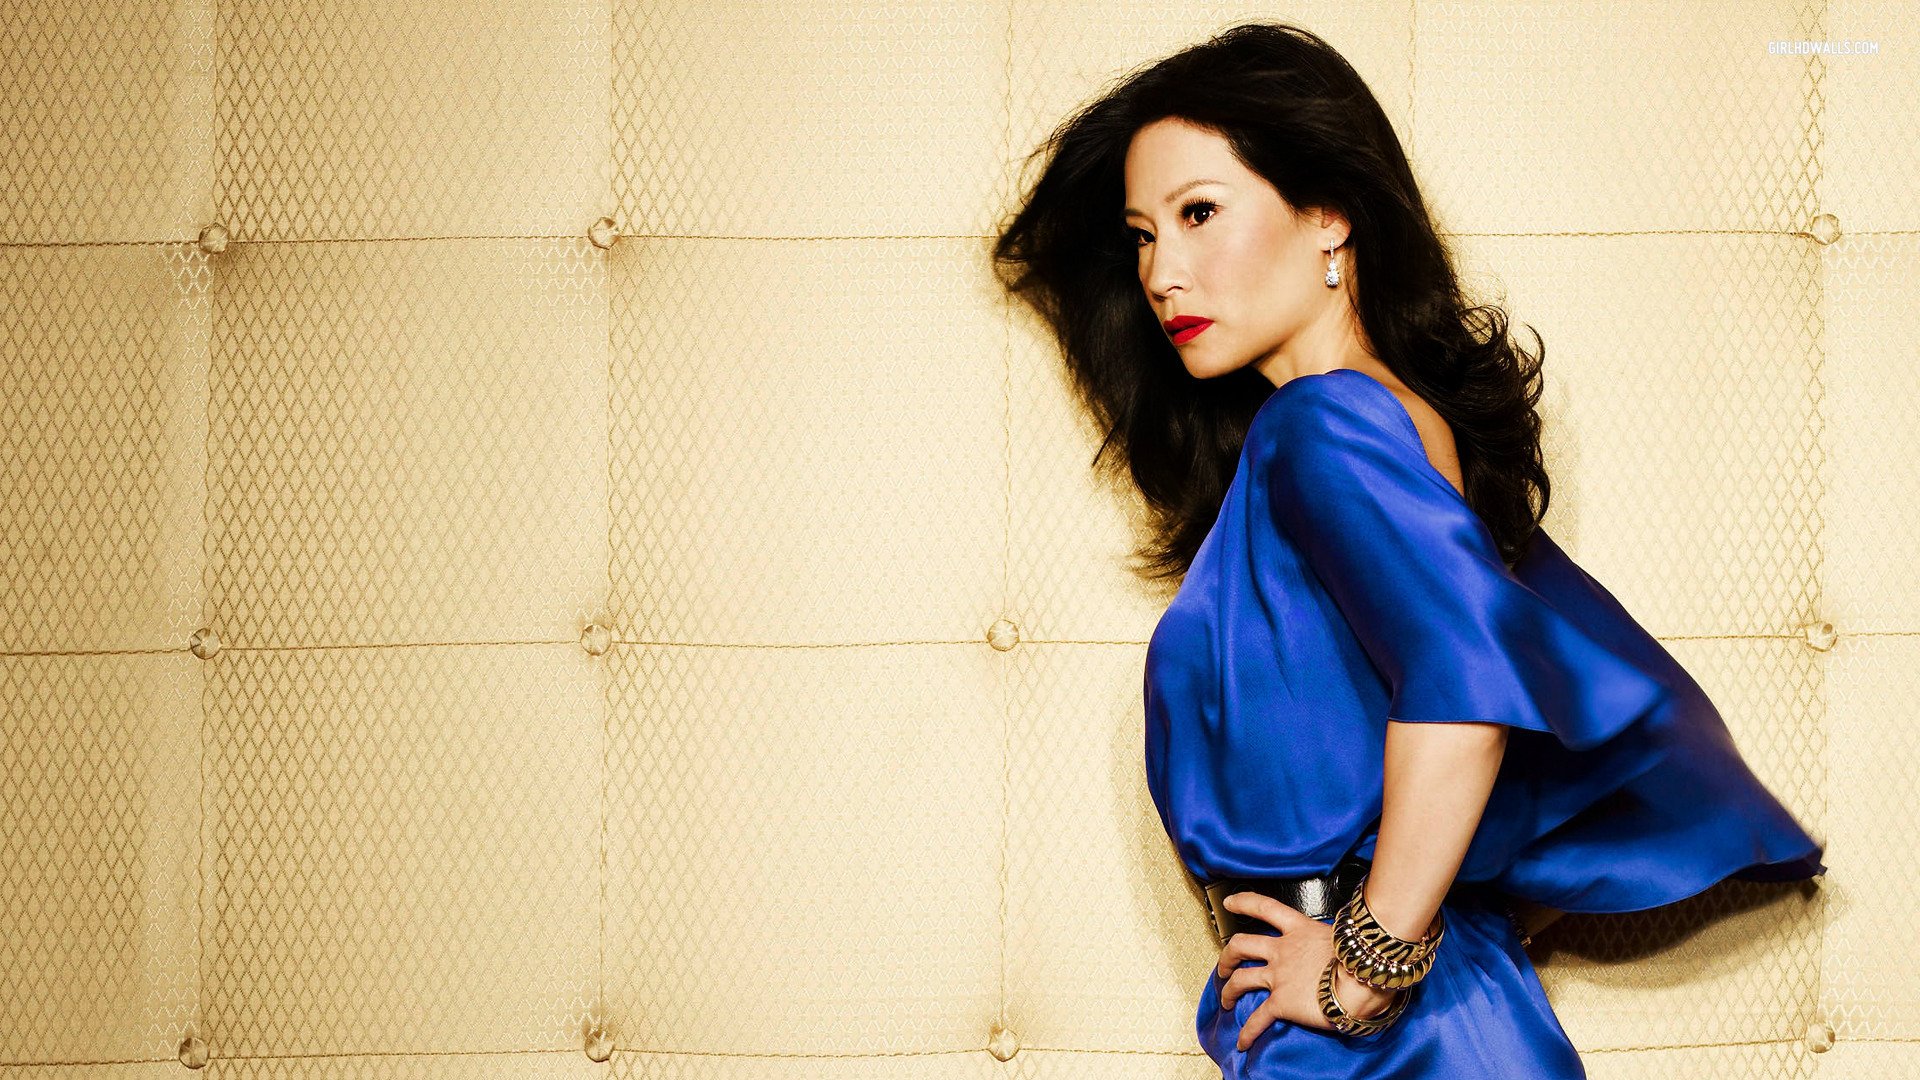 HD Wallpaper Lucy Liu High Quality And Definition